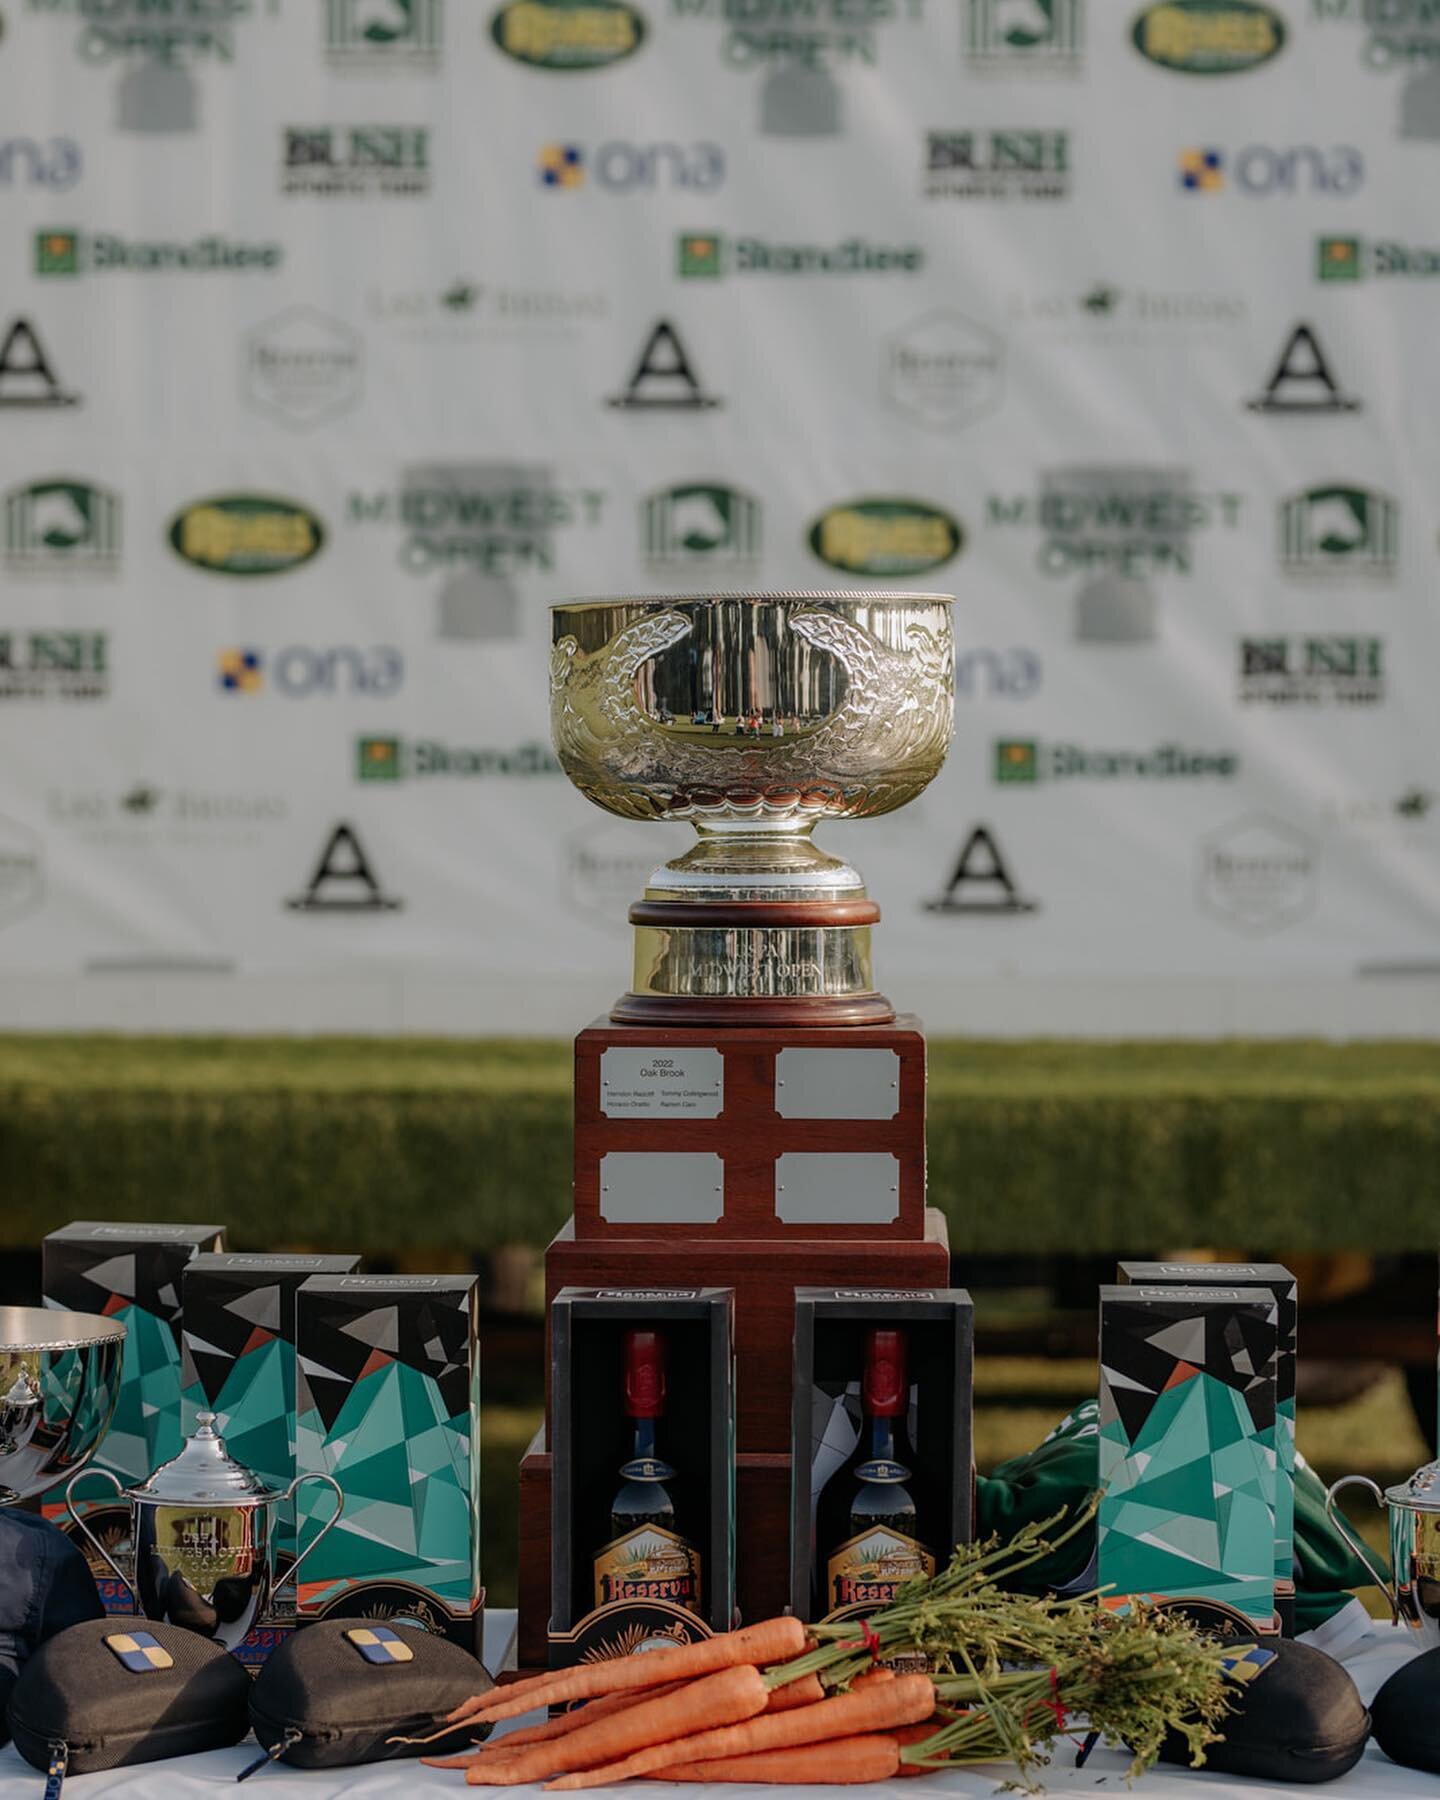 A very special thank you to our 2023 Midwest Open Sponsors 🏆

@ainsleysaddlery 
@americanstalls 
@bushturf
@reservadelafamilia 
@ona_polo 
@revelsturftractor 
@standleeforage 

📸 @equinebyleah